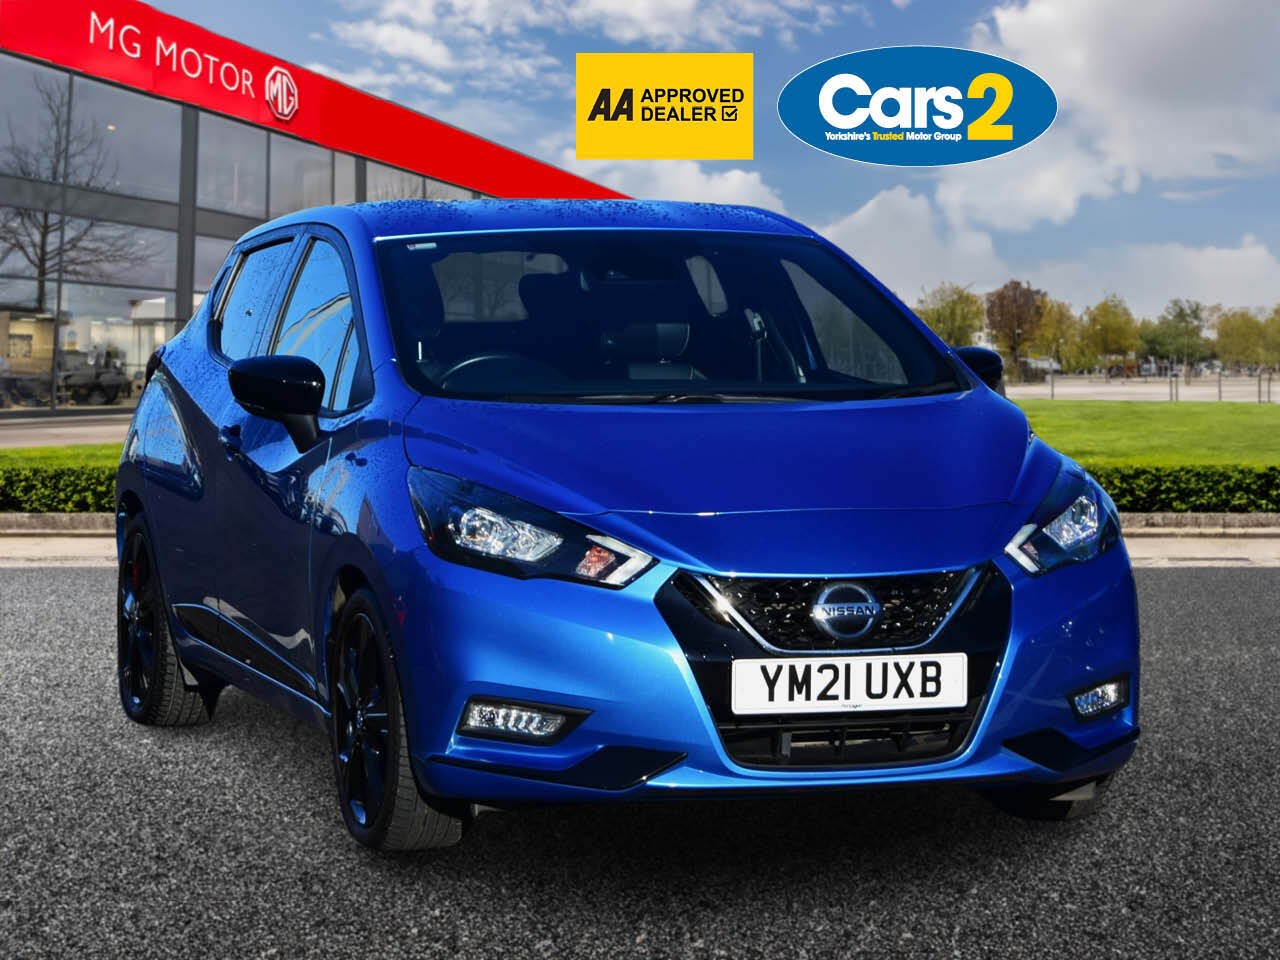 2021 used Nissan Micra 1.0 IG-T 92 N-Sport 5dr CVT Auto